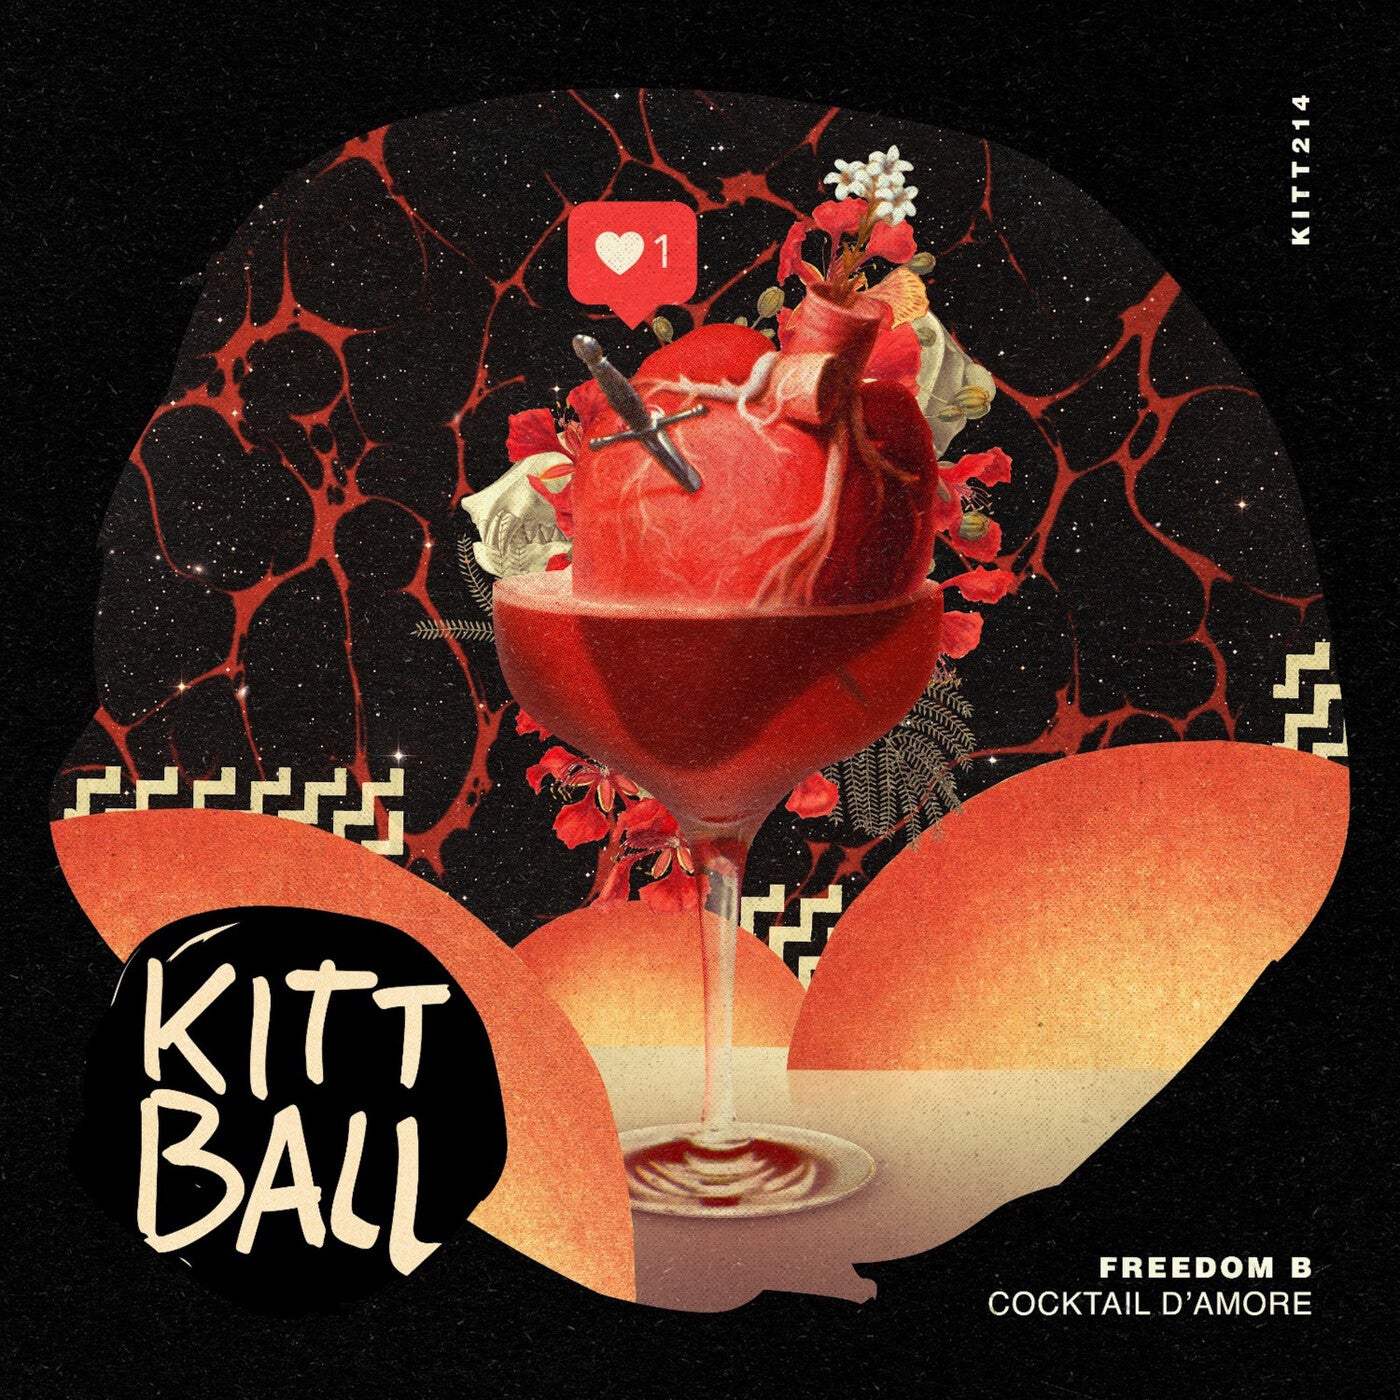 image cover: FreedomB - Cocktail d'Amore / KITT214